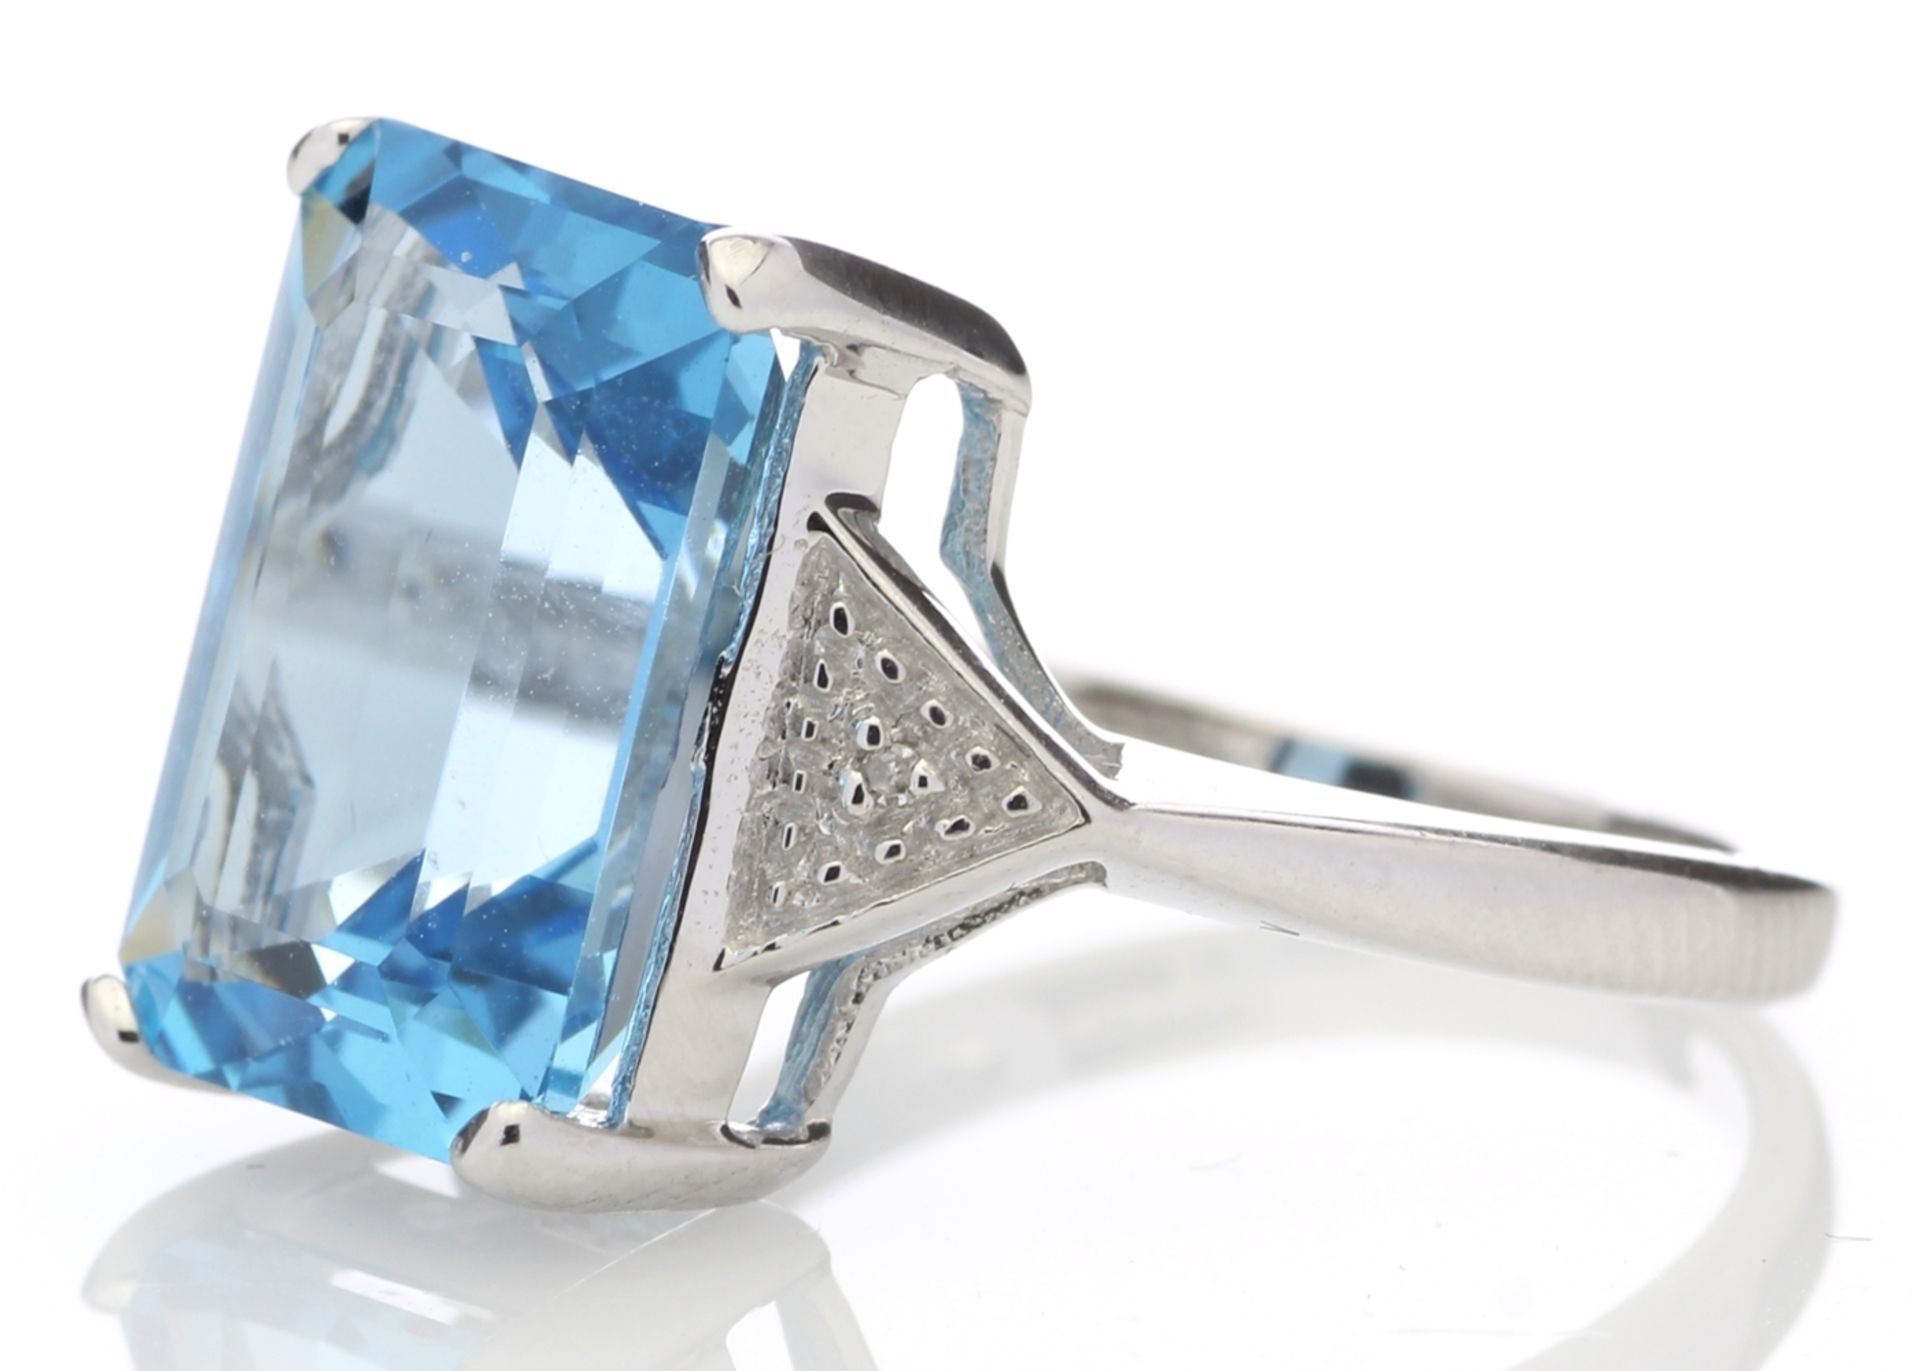 9ct White Gold Diamond And Blue Topaz Ring 0.01 Carats - Image 2 of 6